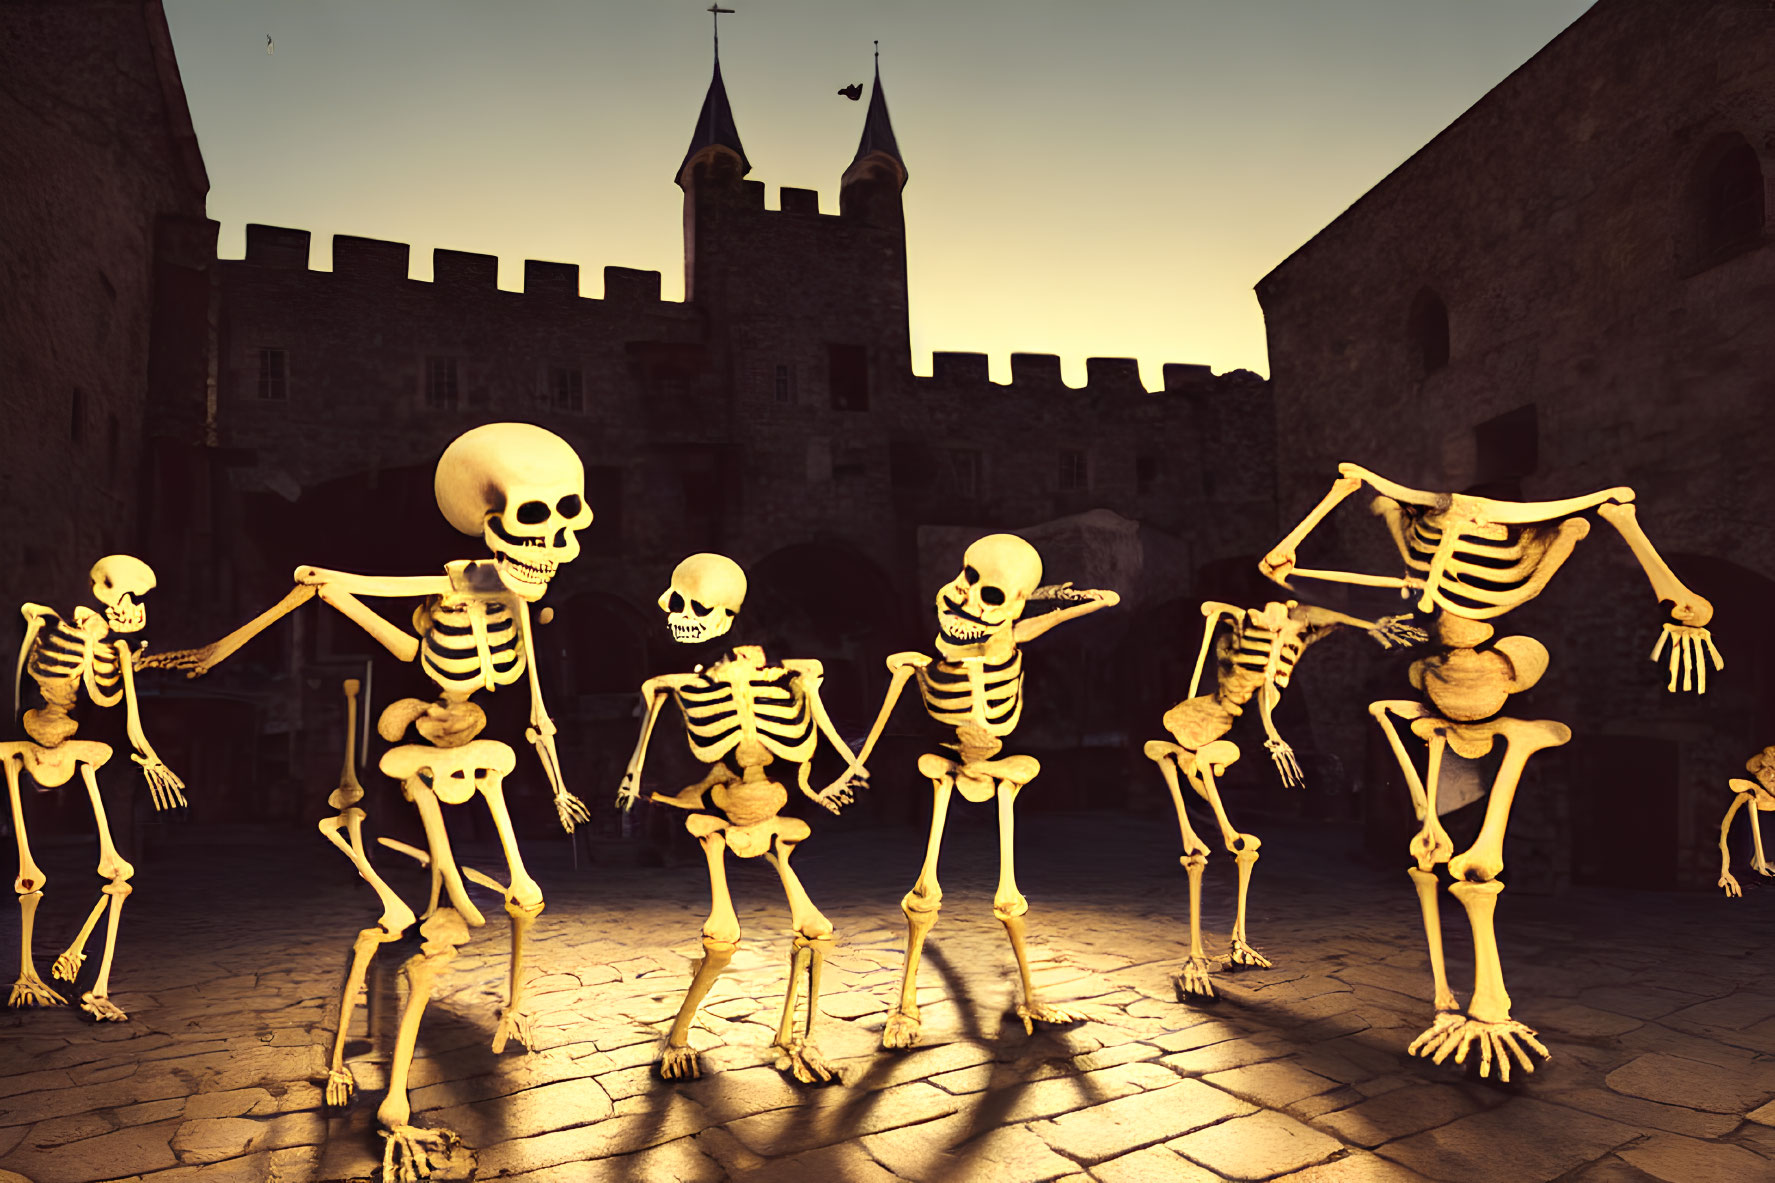 Medieval courtyard scene with dancing skeletons at twilight